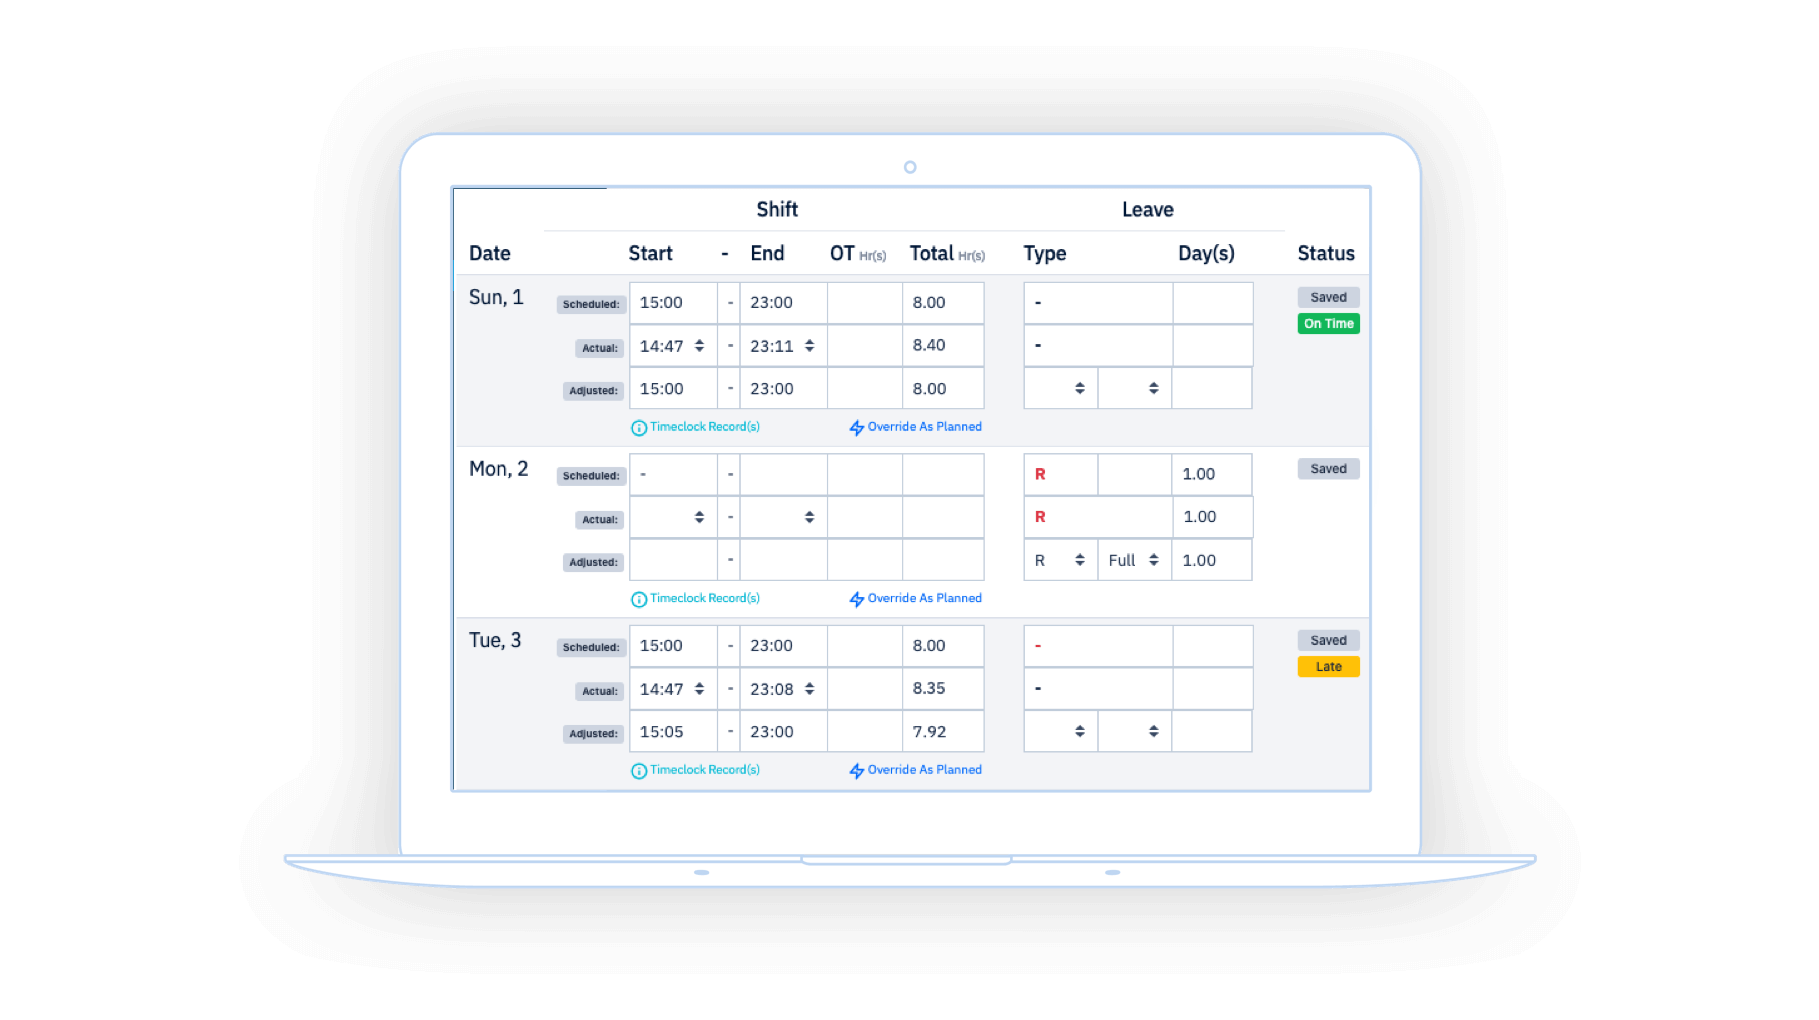 PinShift auto timesheet and attendance management system